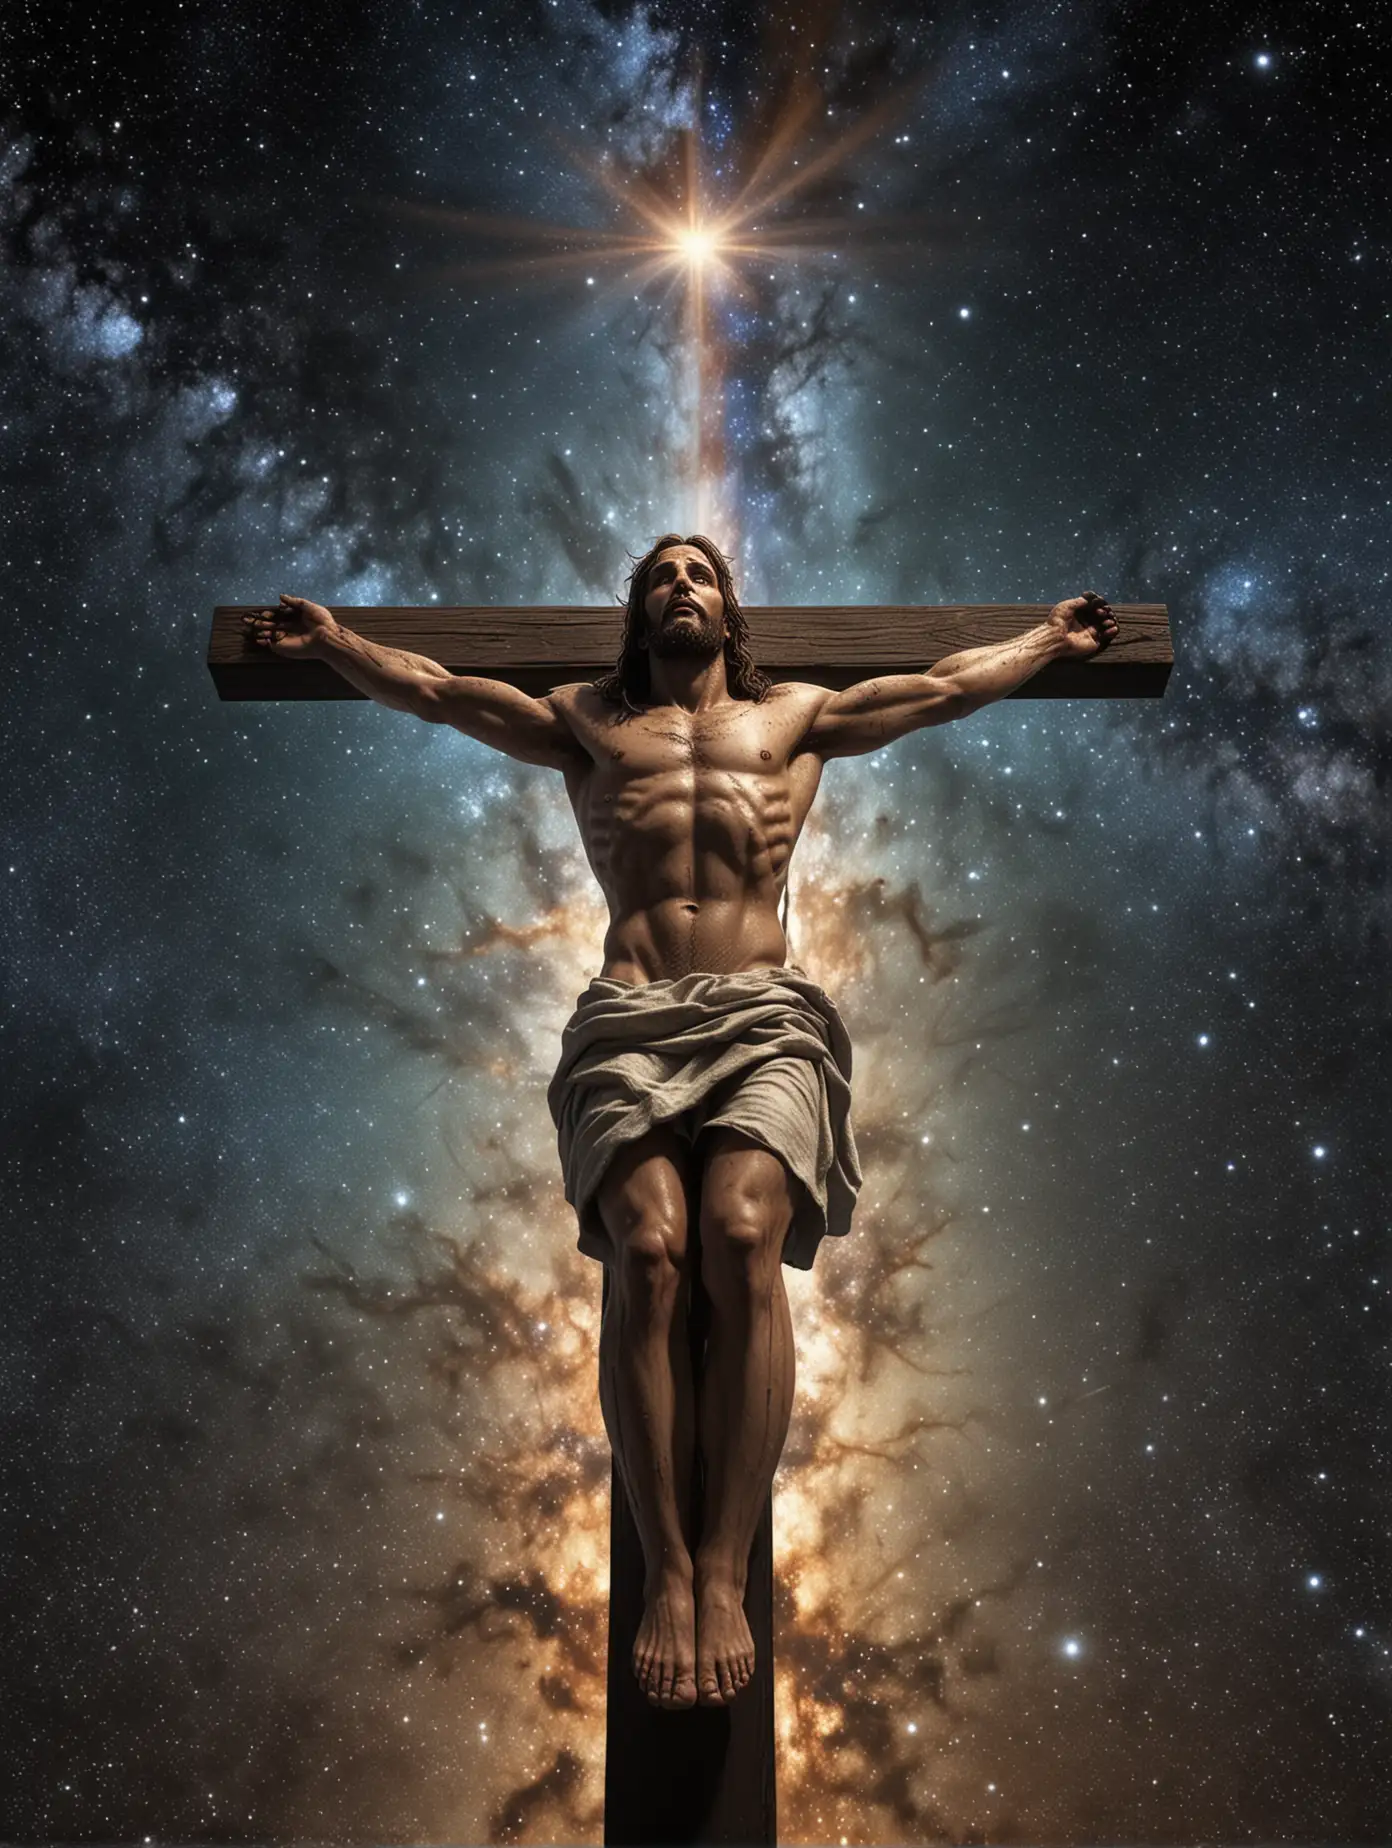 Realistic Jesus Christ Ascending to Heaven on Cross in Milky Way Space